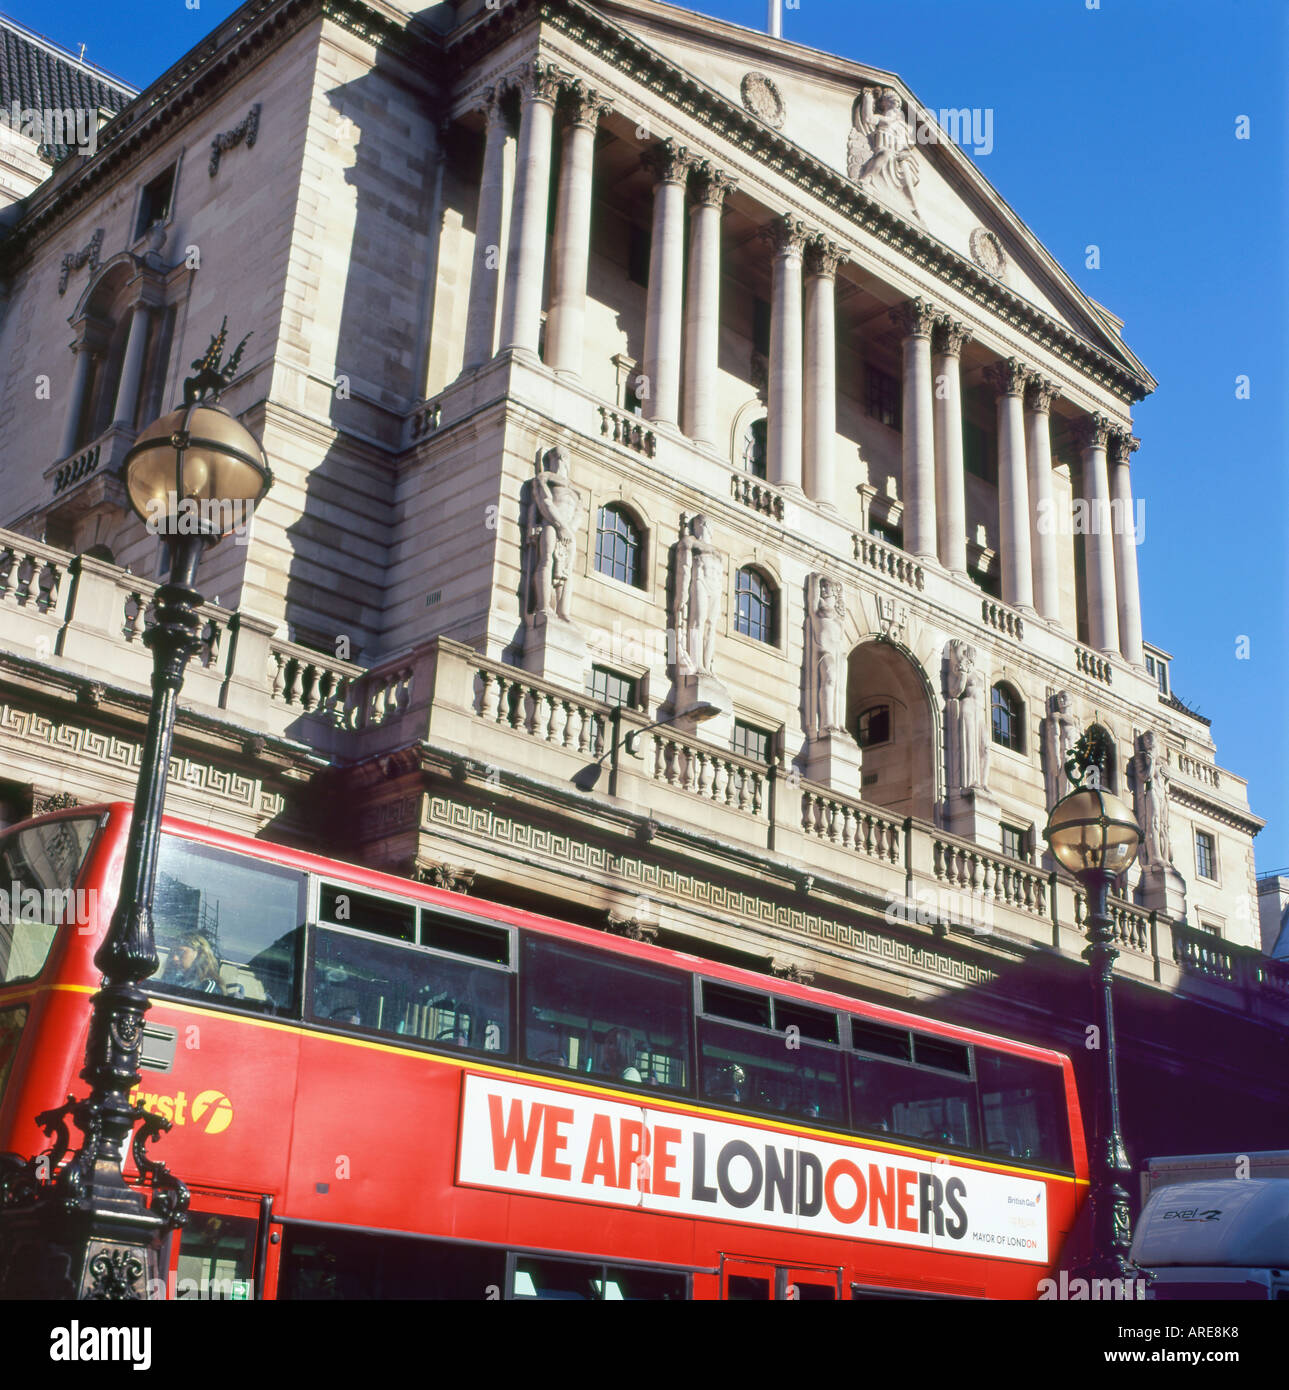 We Are Londoners logo on a double decker bus outside the Bank of England London UK KATHY DEWITT Stock Photo